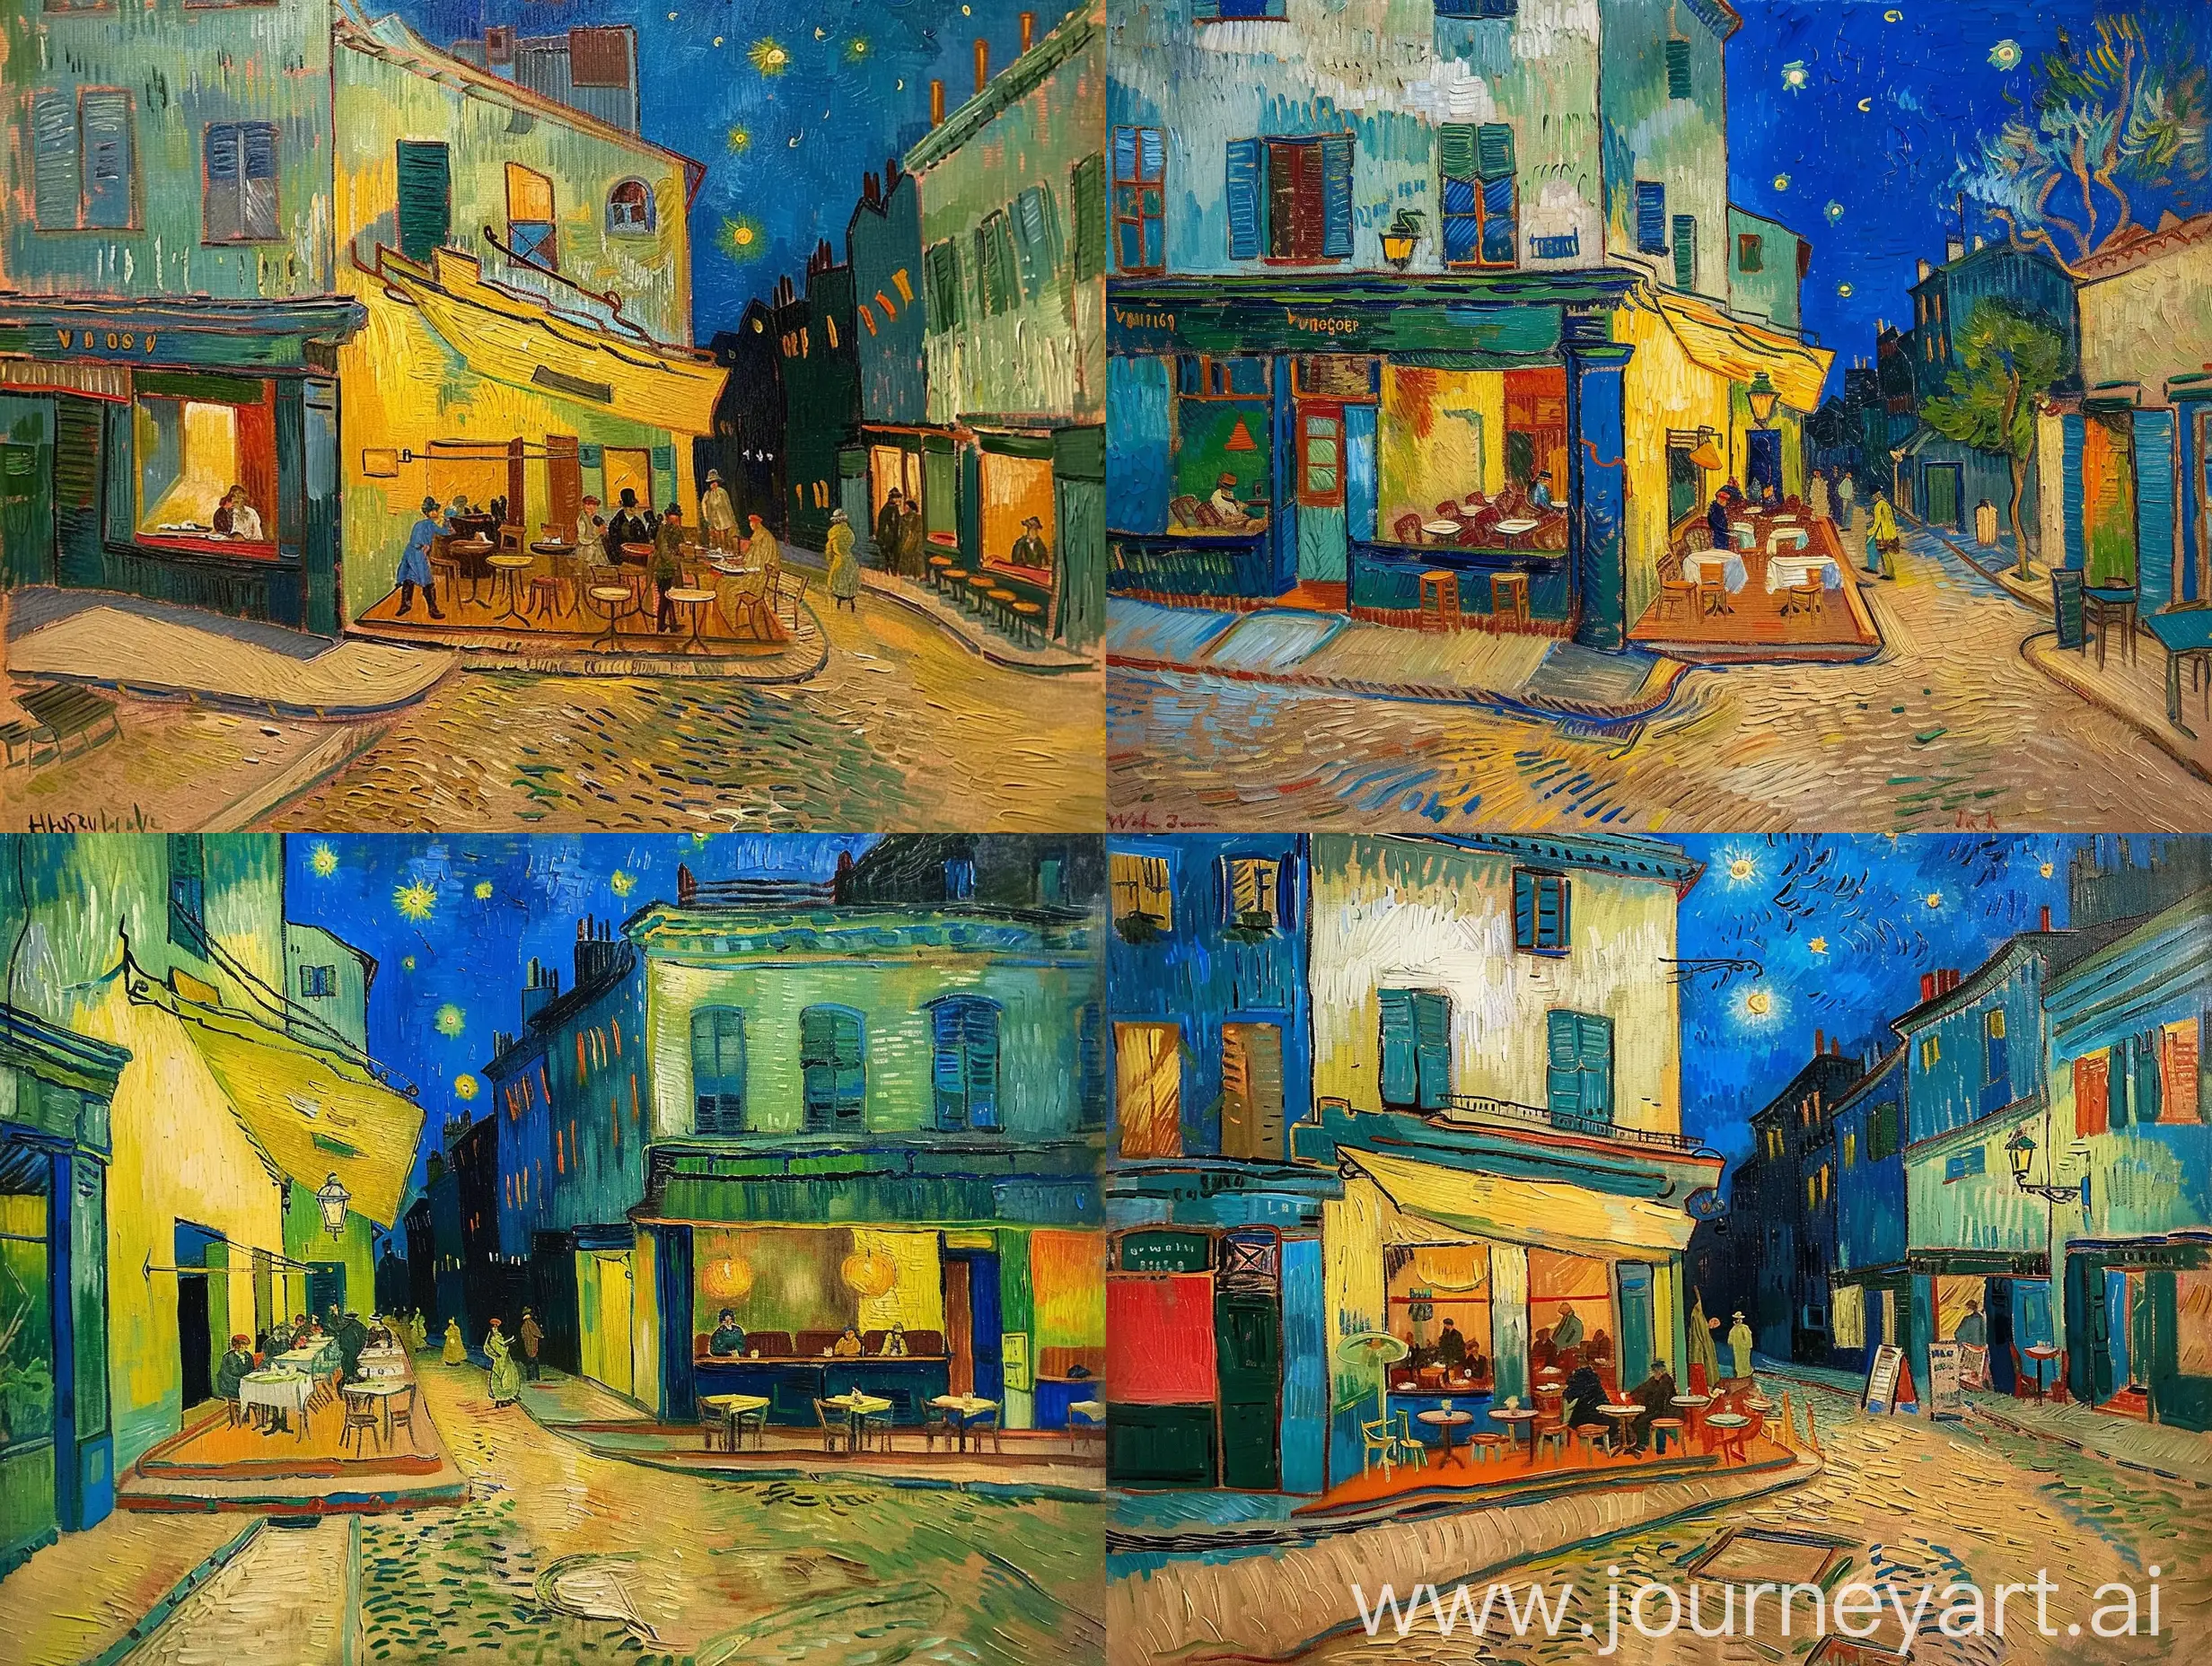 Vibrant-Oil-Painting-of-a-Charming-Restaurant-by-Van-Gogh